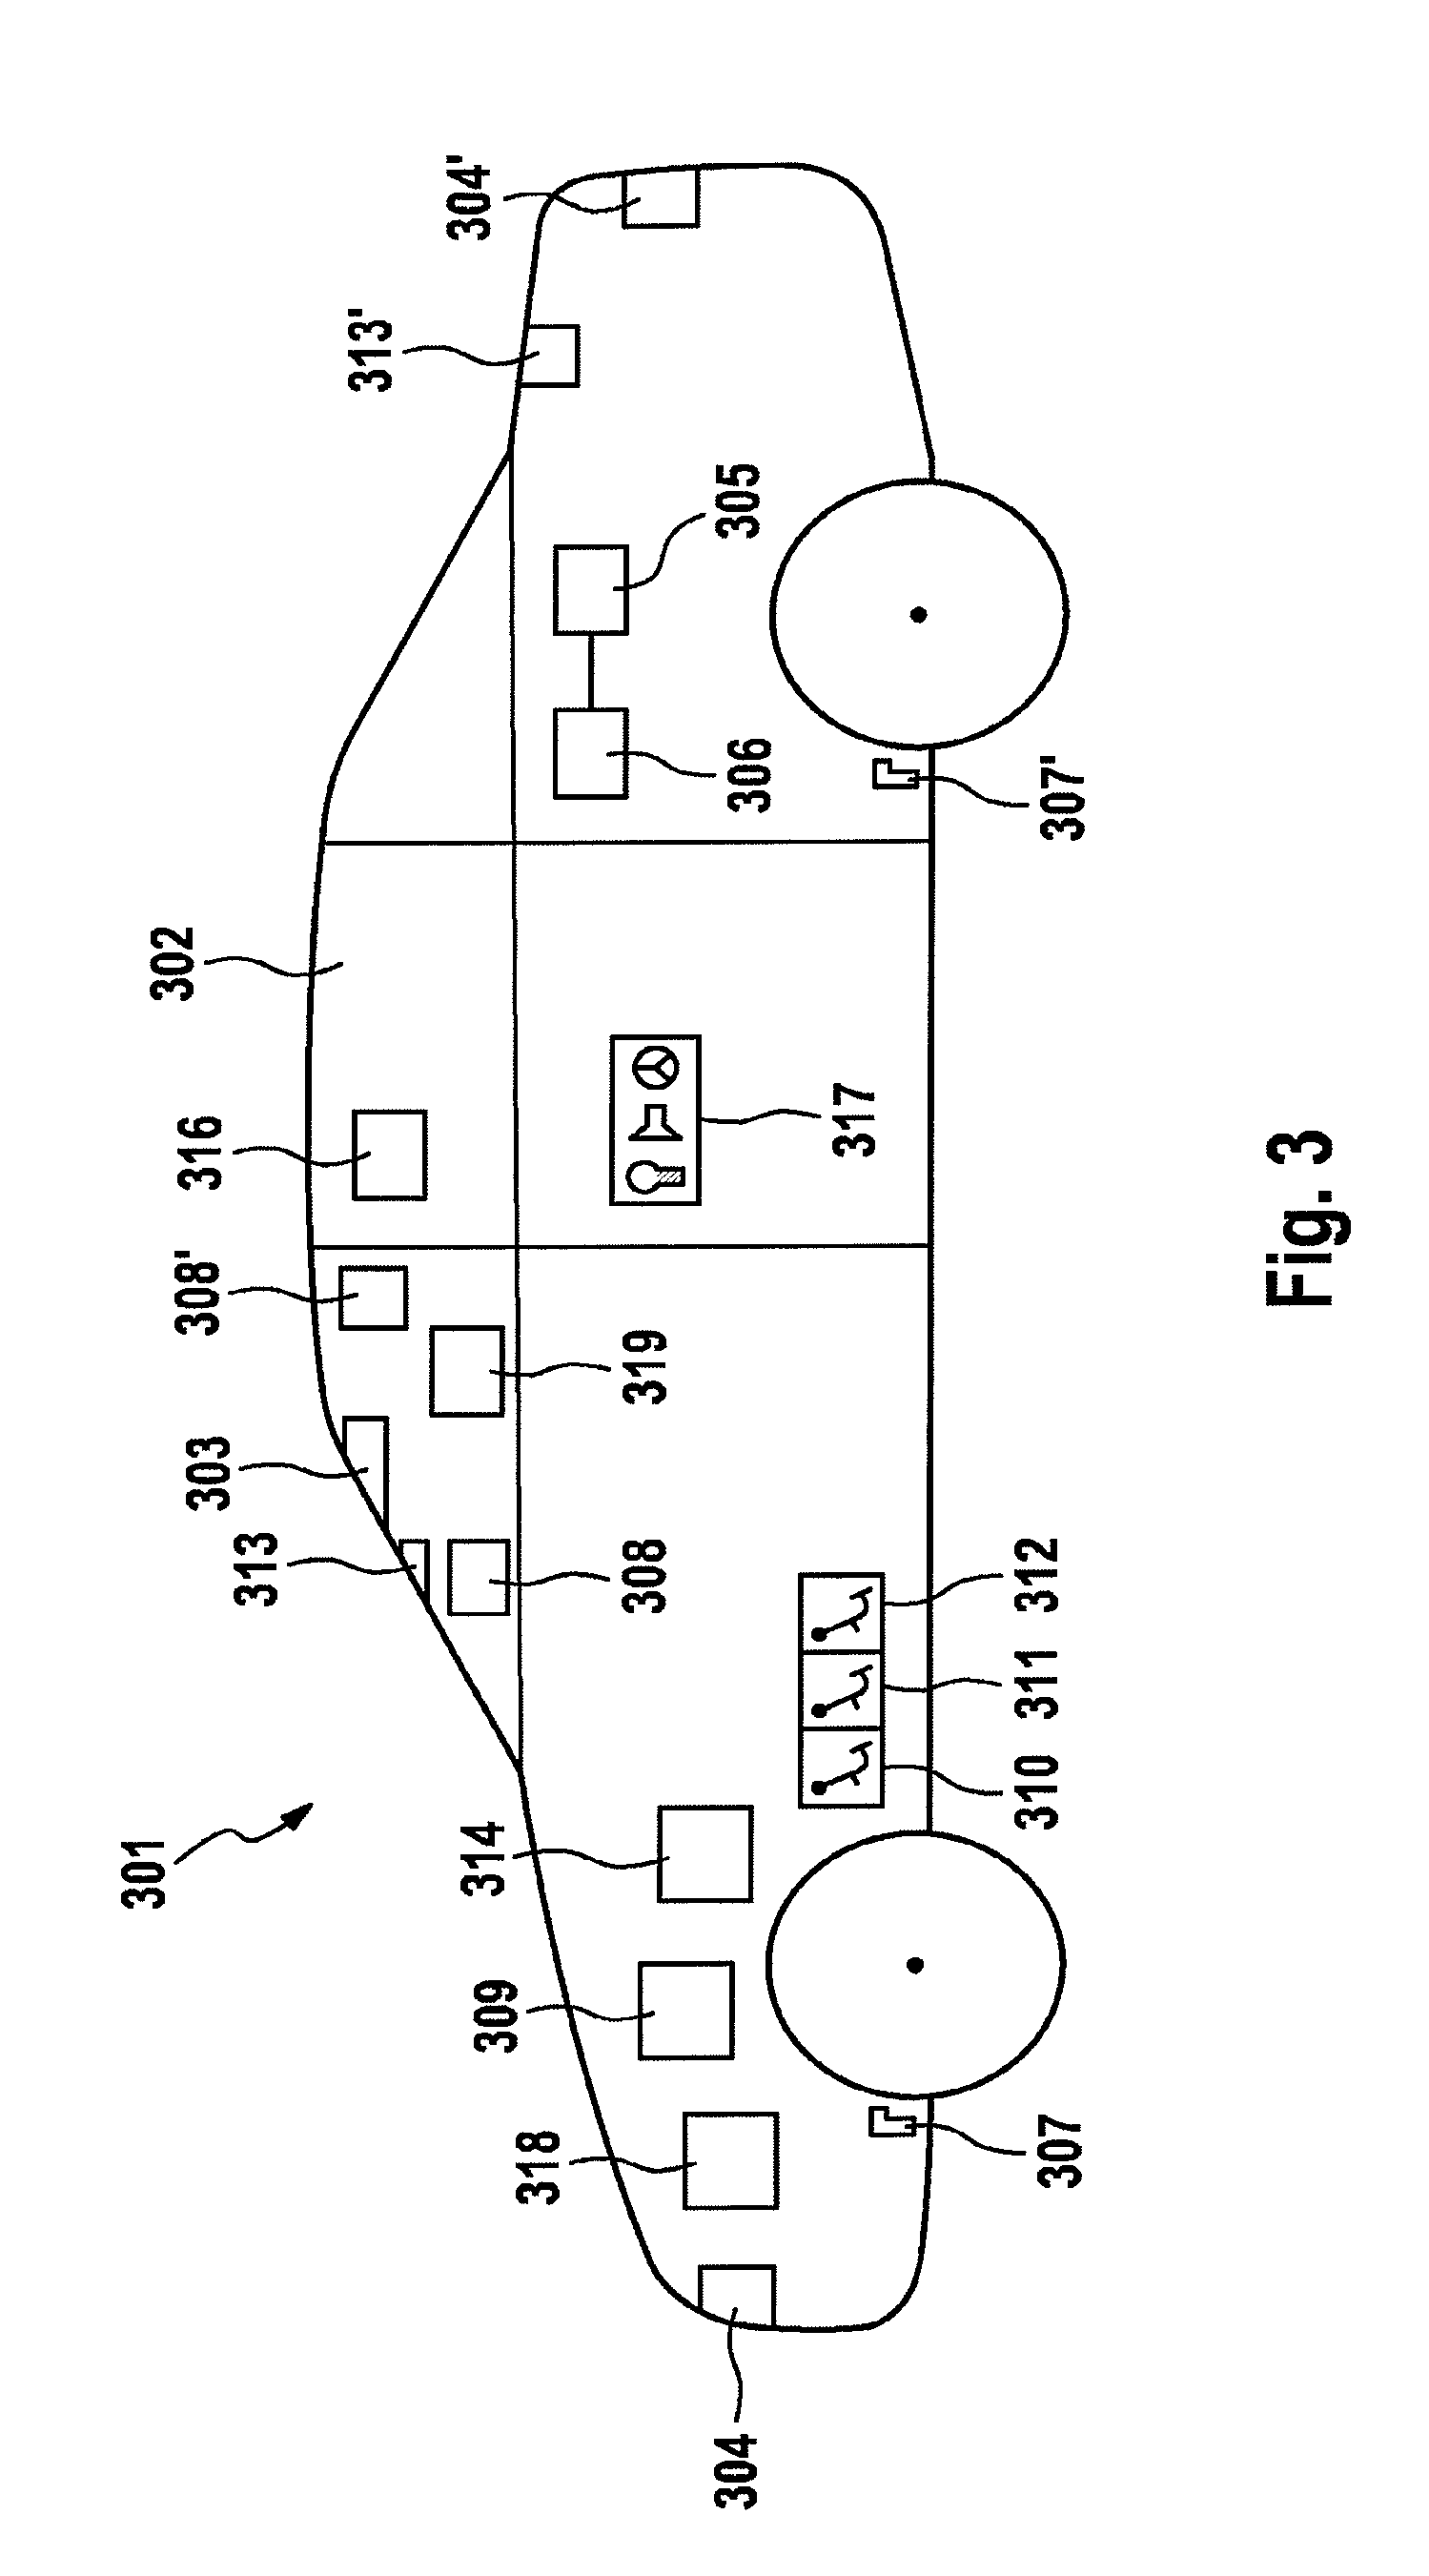 Method and system for promoting a uniform driving style